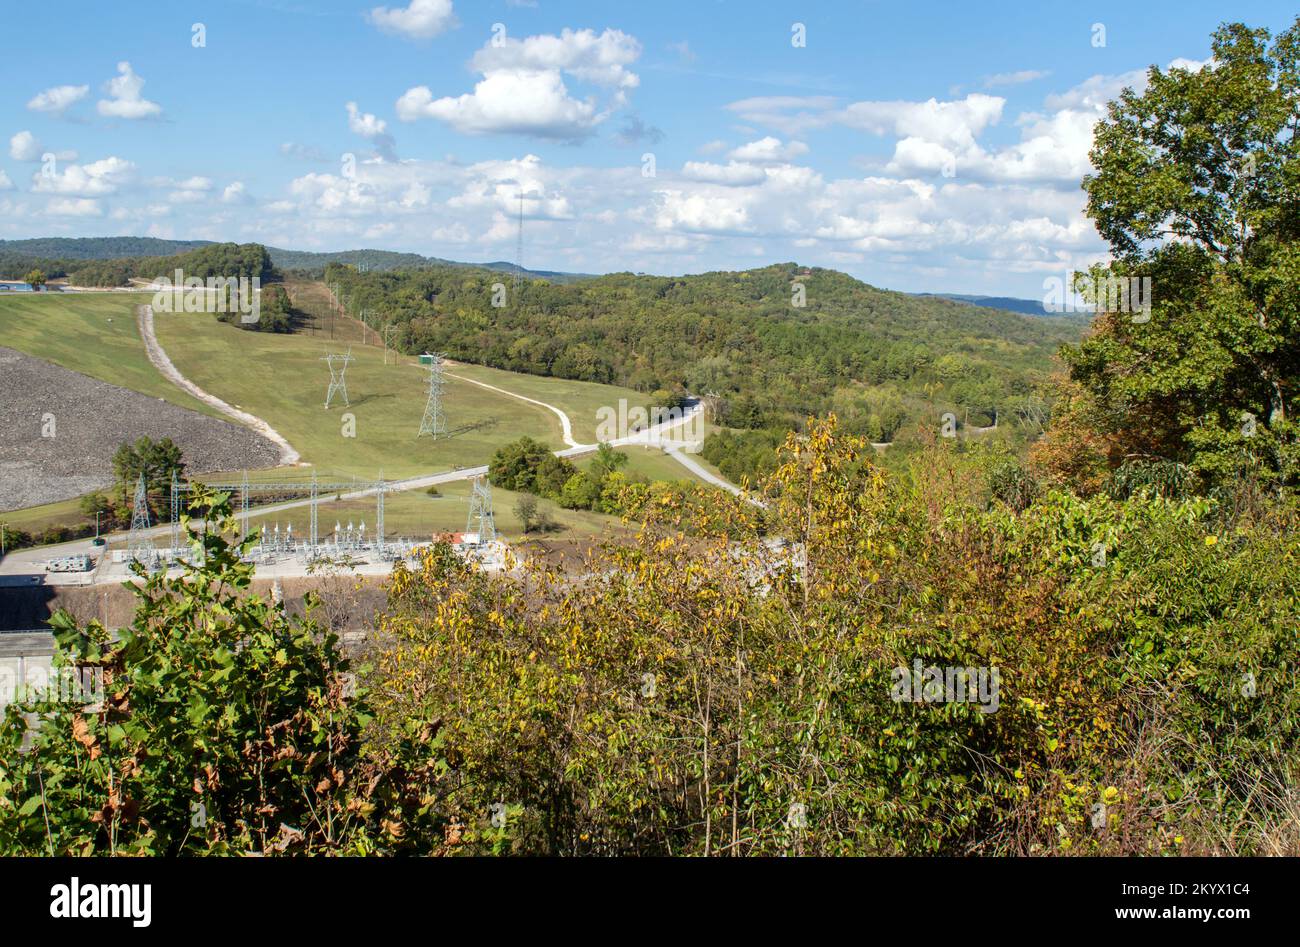 The blue sky, green trees, Arkansas dam and meandering roads makes a peaceful view from high above. A nice spot for admiring nature and man made struc Stock Photo